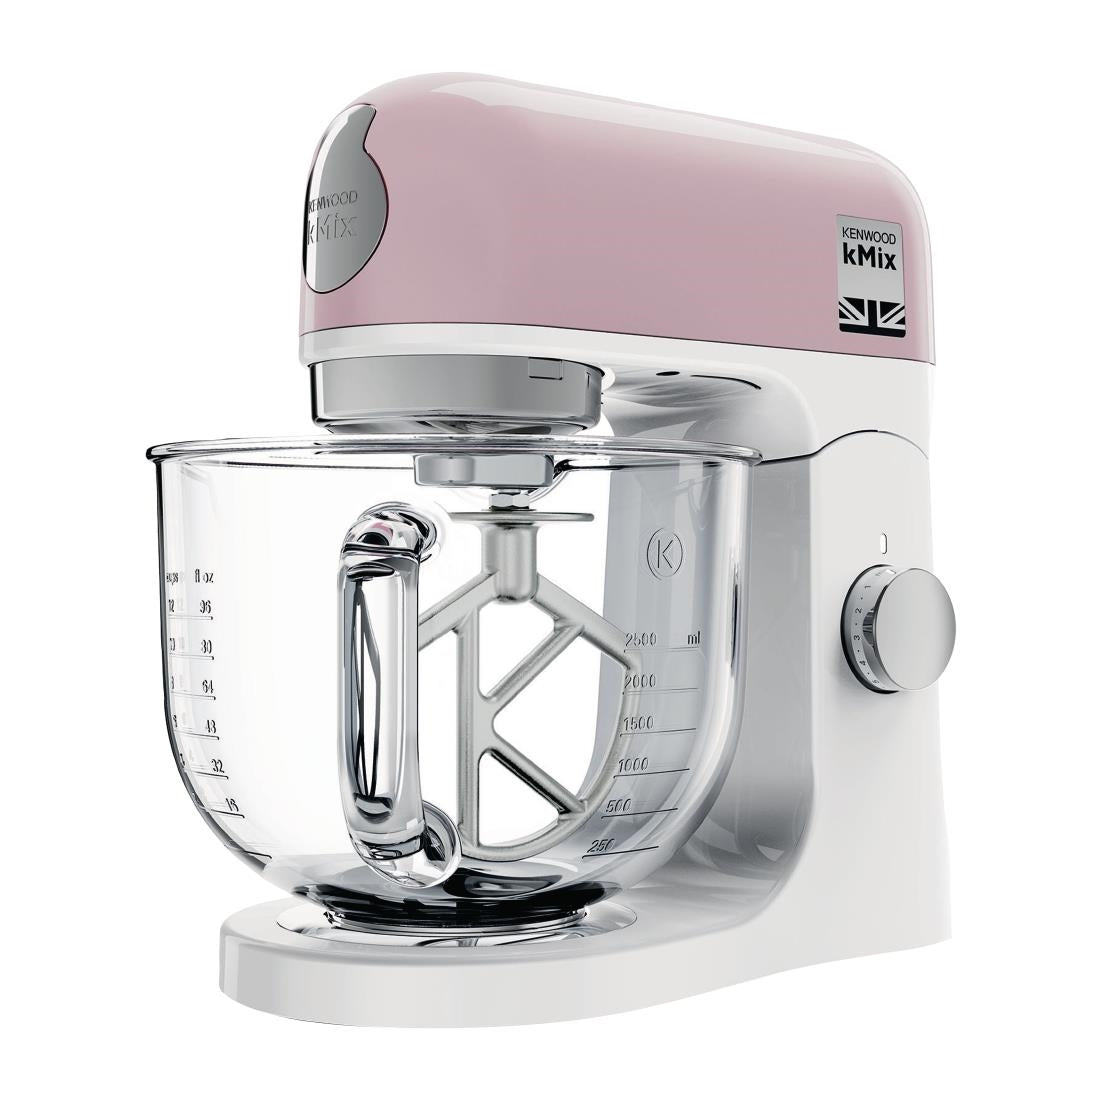 CH648 Kenwood kMix Stand Mixer Pastel Pink JD Catering Equipment Solutions Ltd